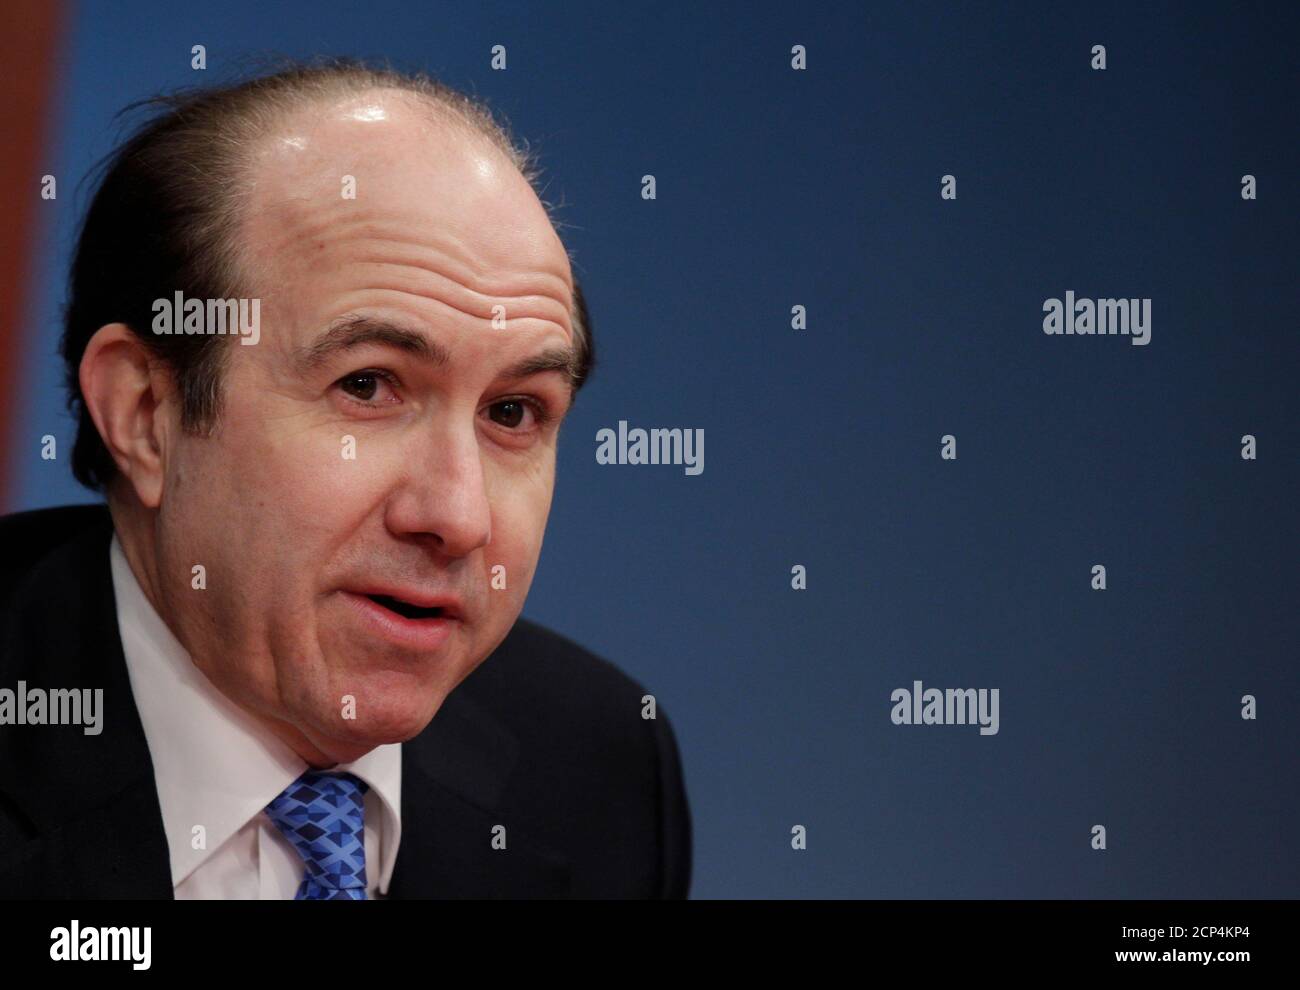 Philippe Dauman, president and CEO of Viacom, speaks at the Reuters Global Media Summit in New York, United States on December 2, 2010.   REUTERS/Brendan McDermid/File Photo Stock Photo